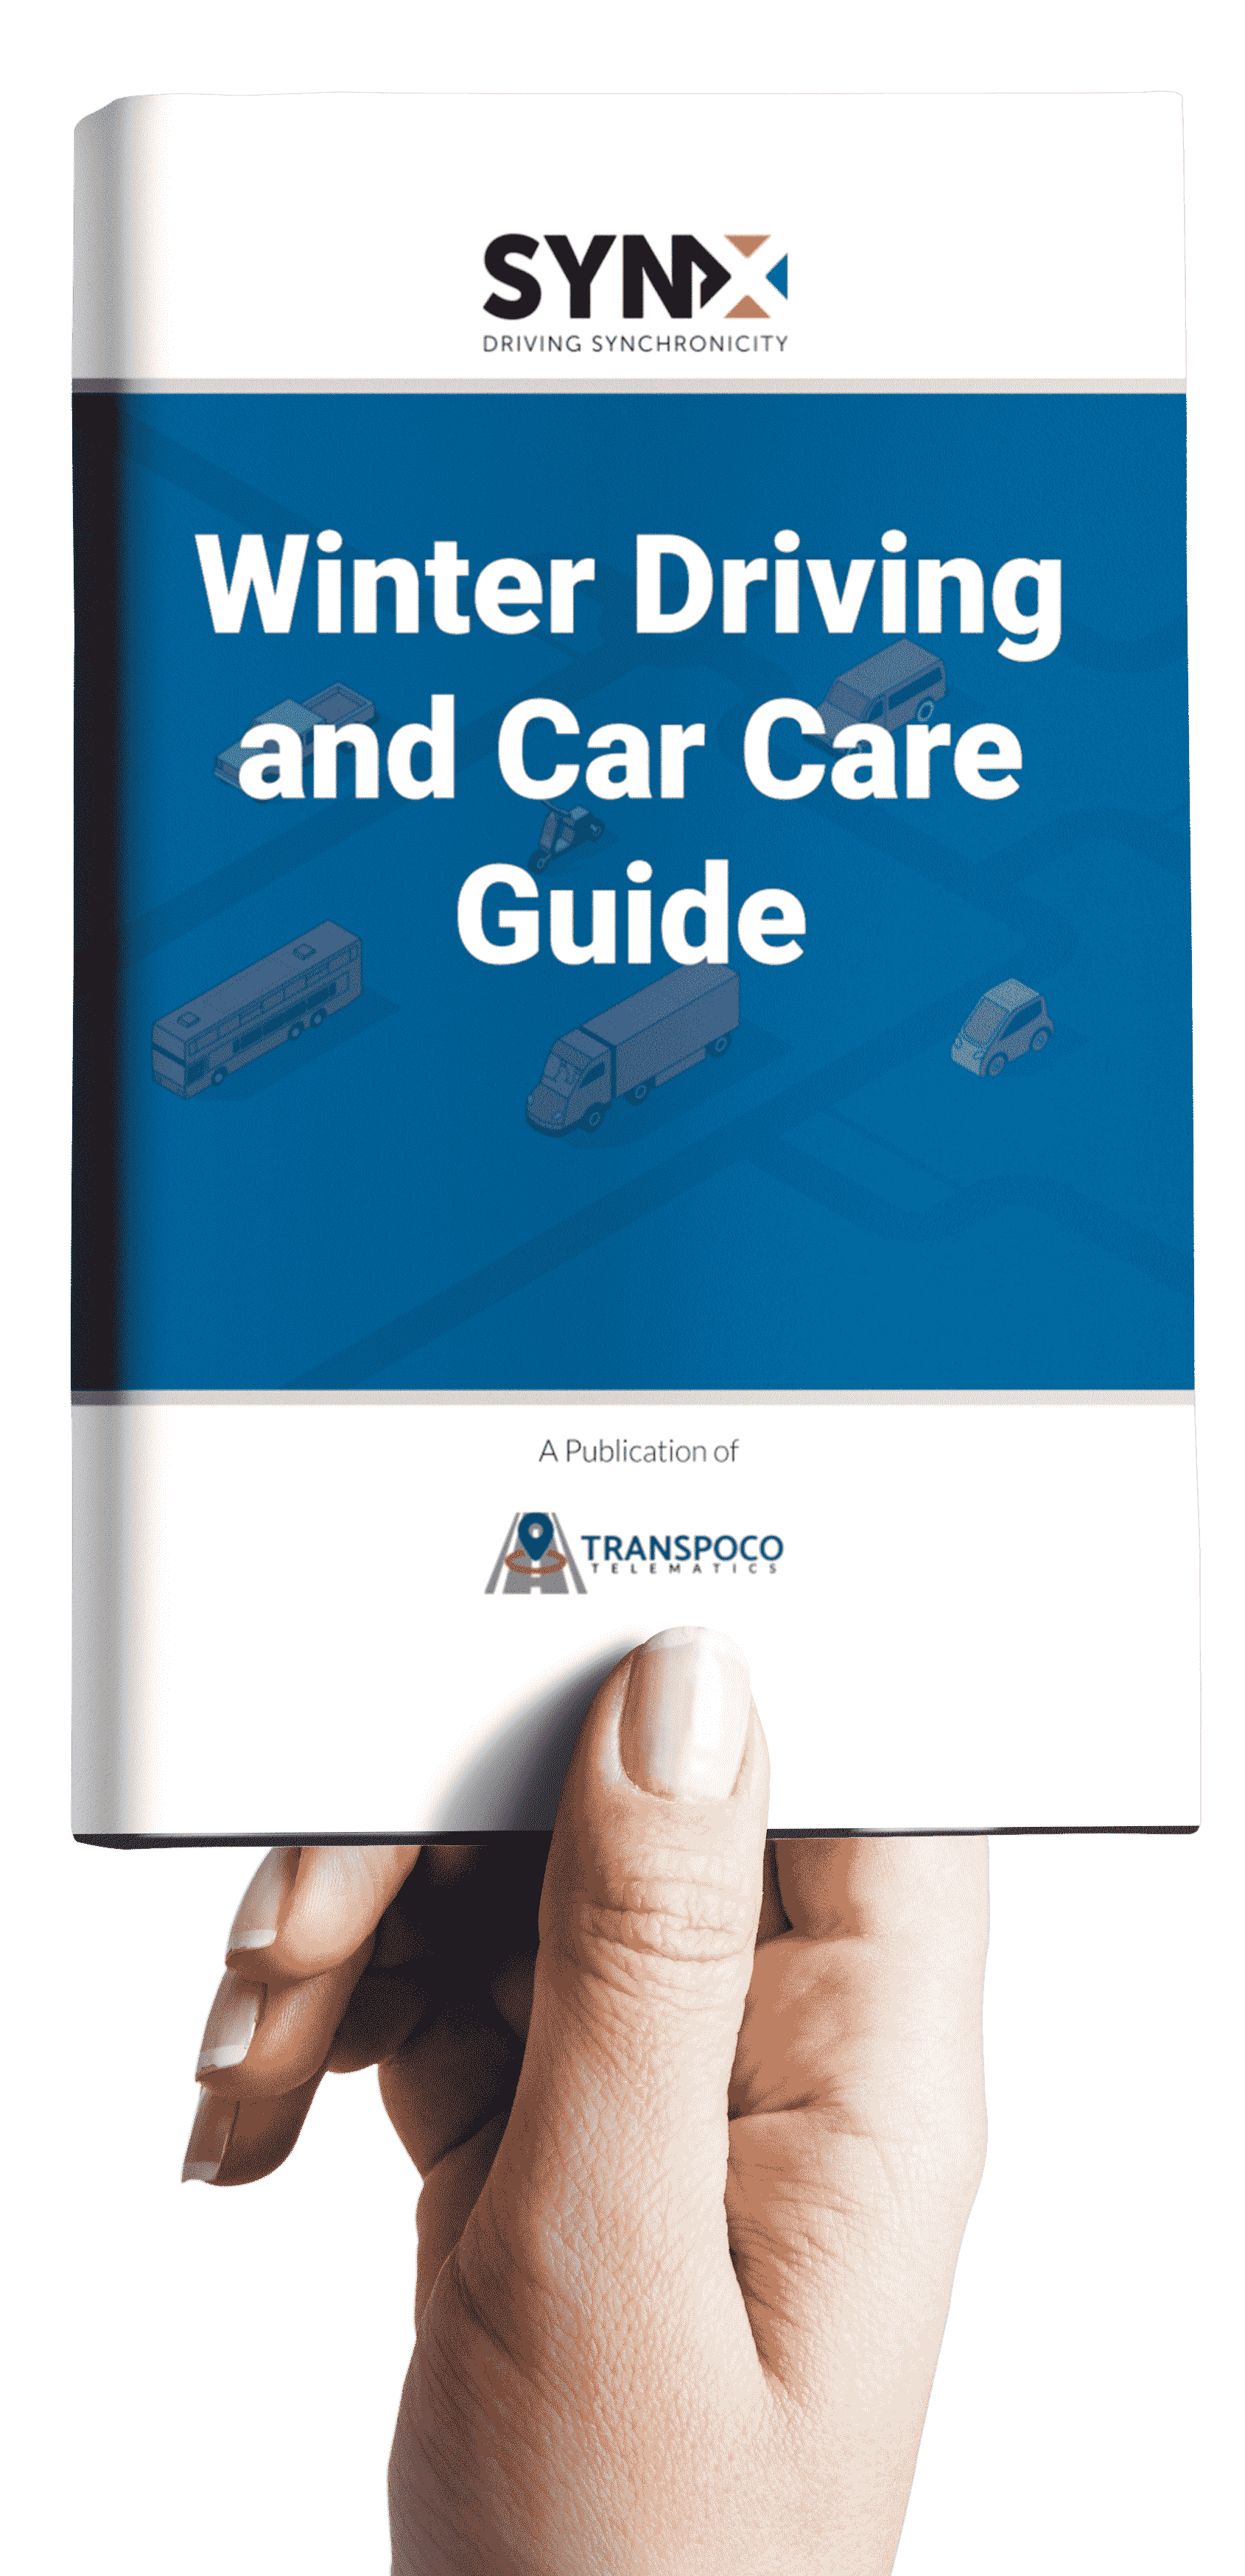 eBook_Step by Step Guide to the Perfect Fleet Policy_EN - MOCKUP